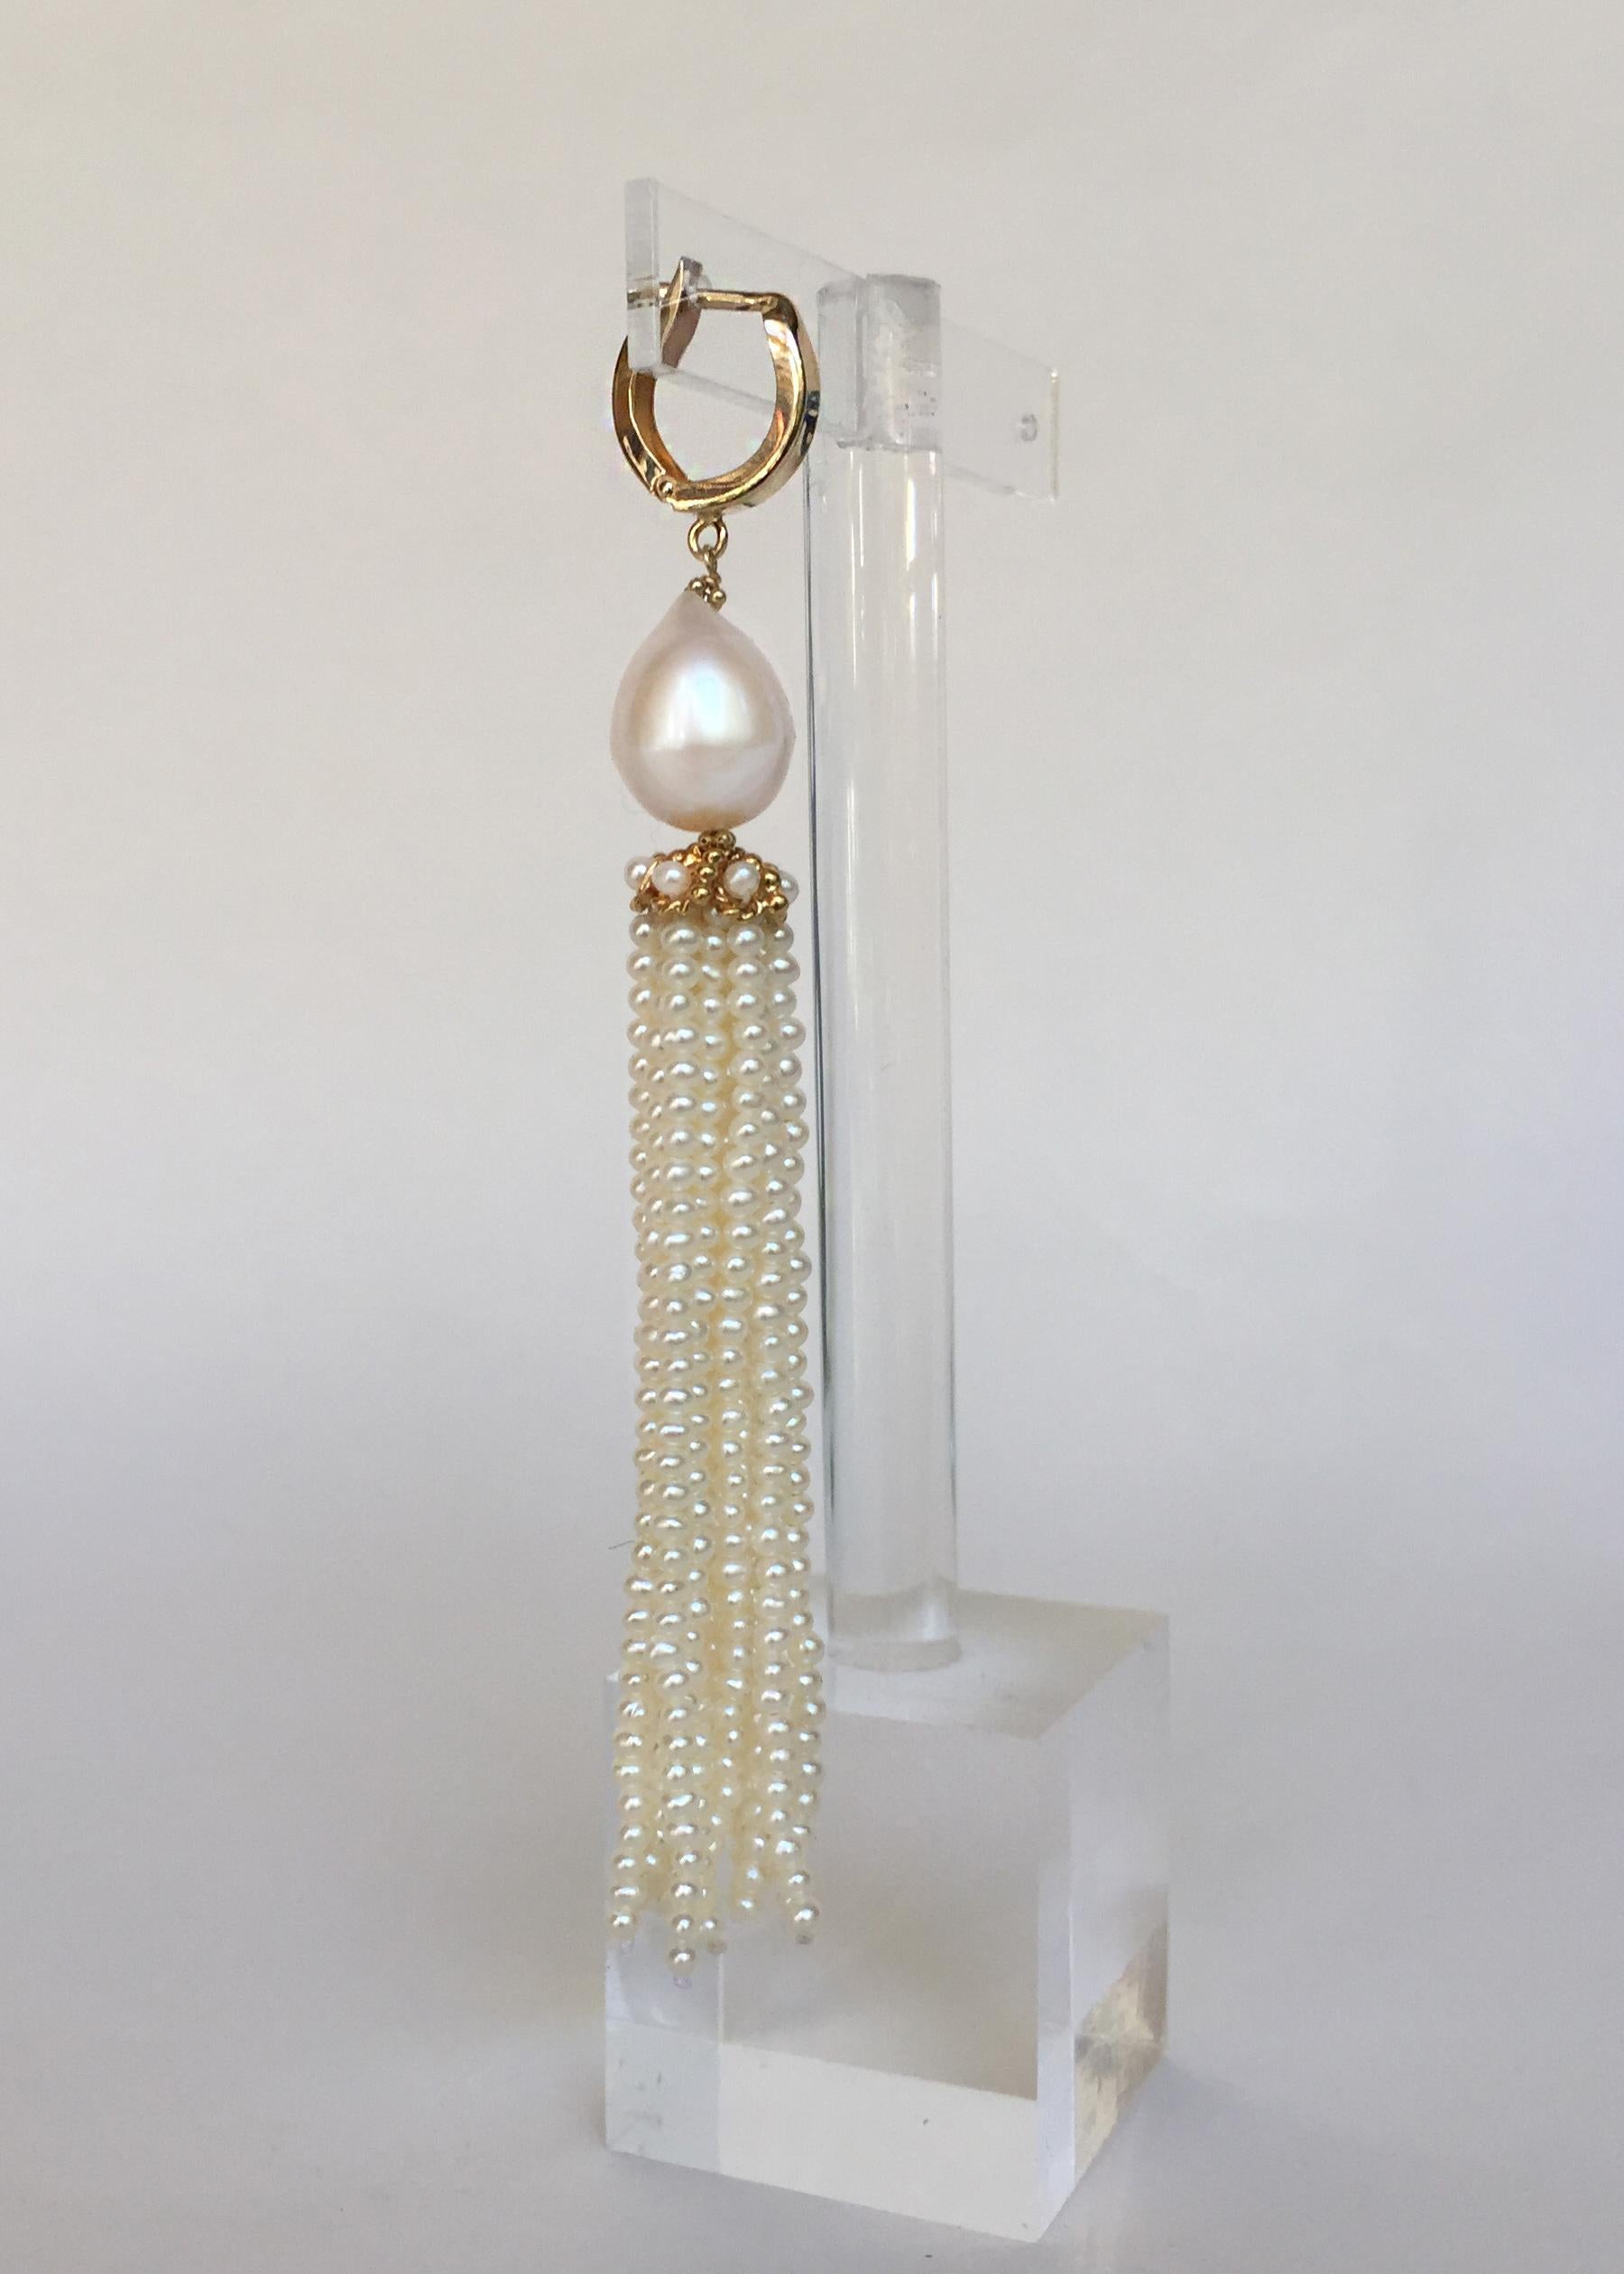 These glowing white pearl tassel earrings are highlighted with  detailed 14k yellow gold cups and lever backs. The tassel strands are made with small 1mm cultured round pearls that glisten with the movement of the tassel. Woven through the 14k